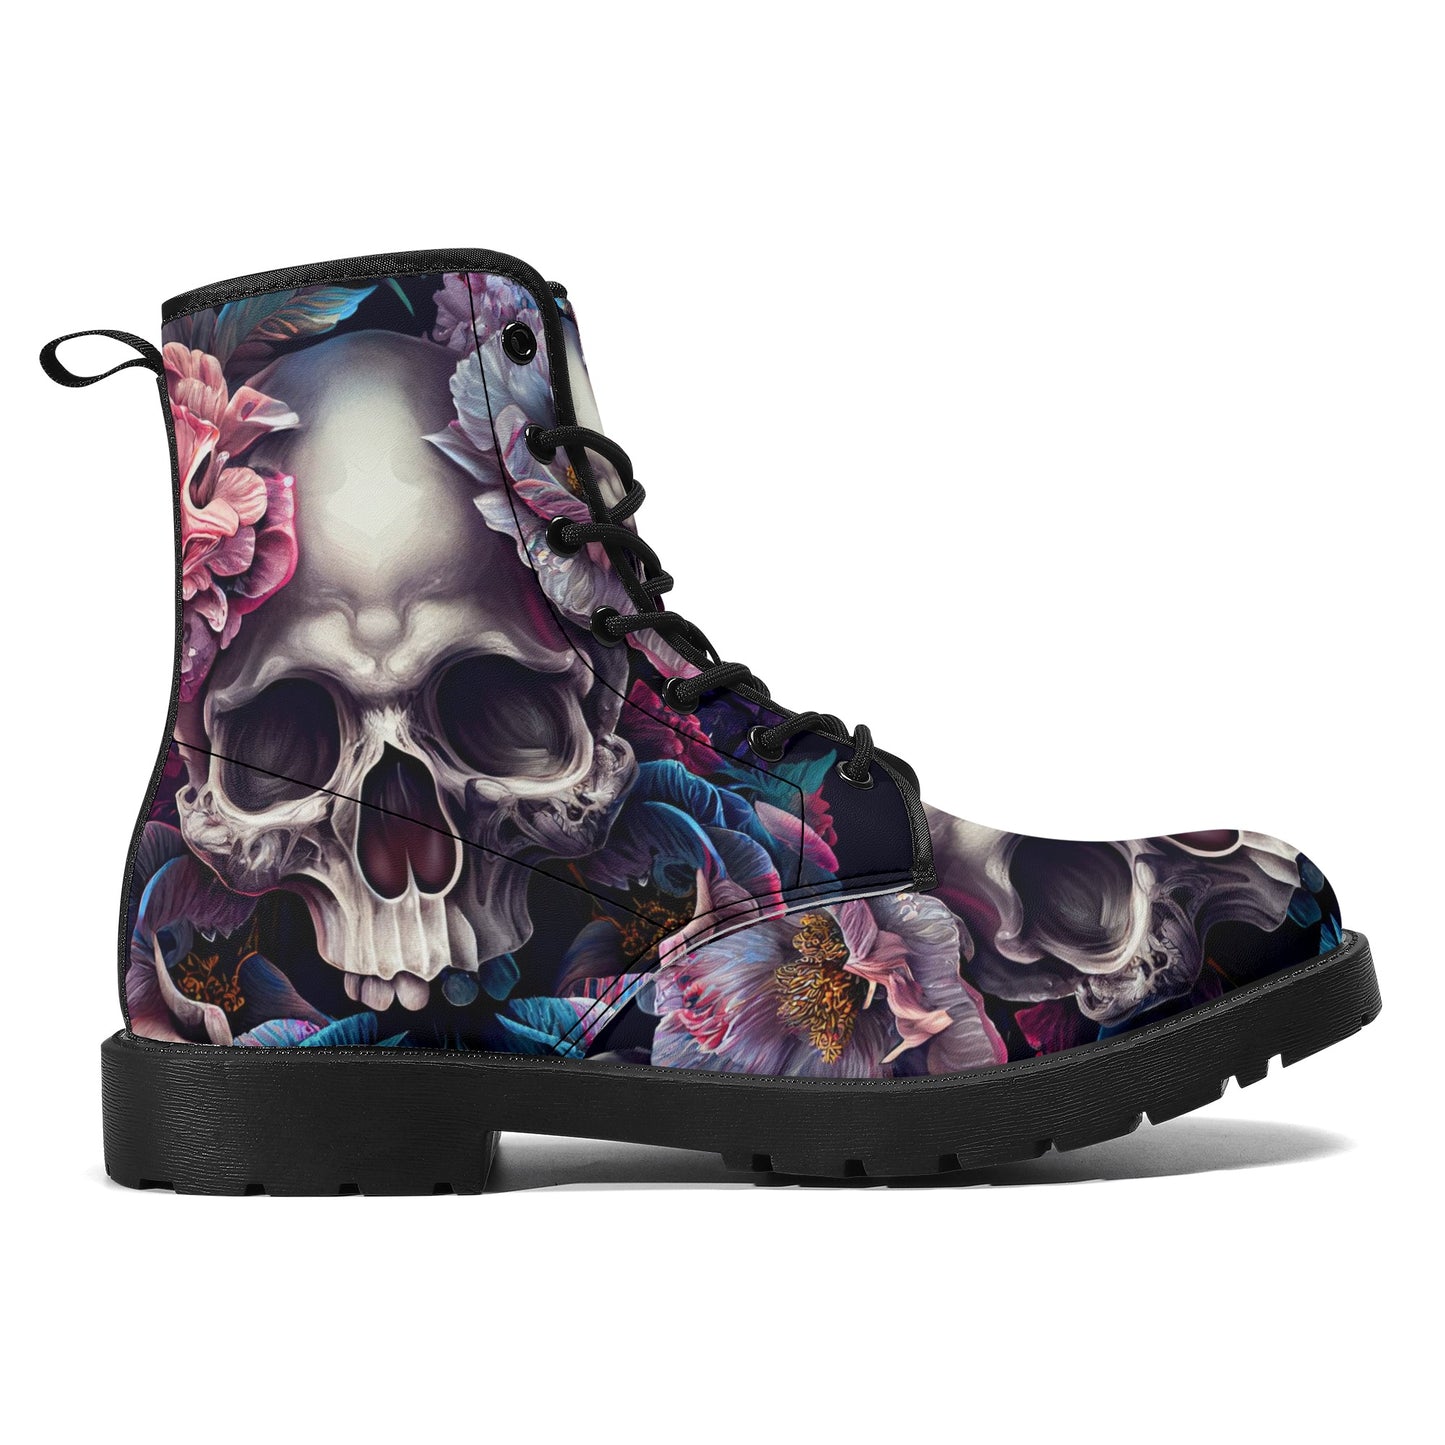 Gothic skull combat boots, death skull waterproof Lace Up Anti-Slip platform nooties, rose skull unisex shoes, flaming skull fashion leather Mens Leather Boots